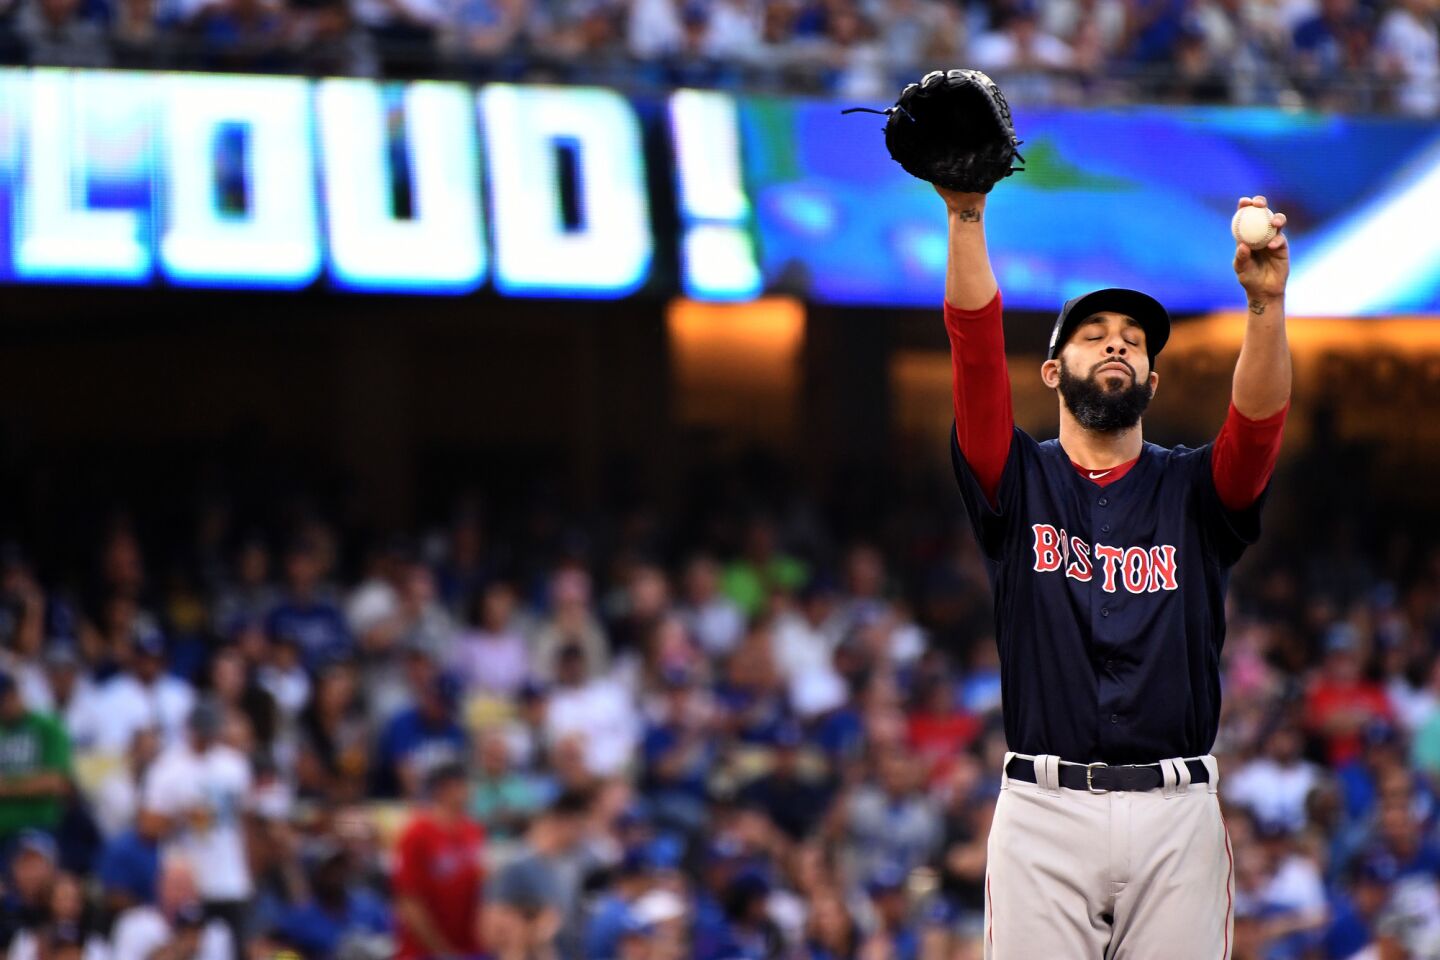 Red Sox pitcher David Price reacts after giving up a solo home run to Dodgers David Freese in the 1st inning.